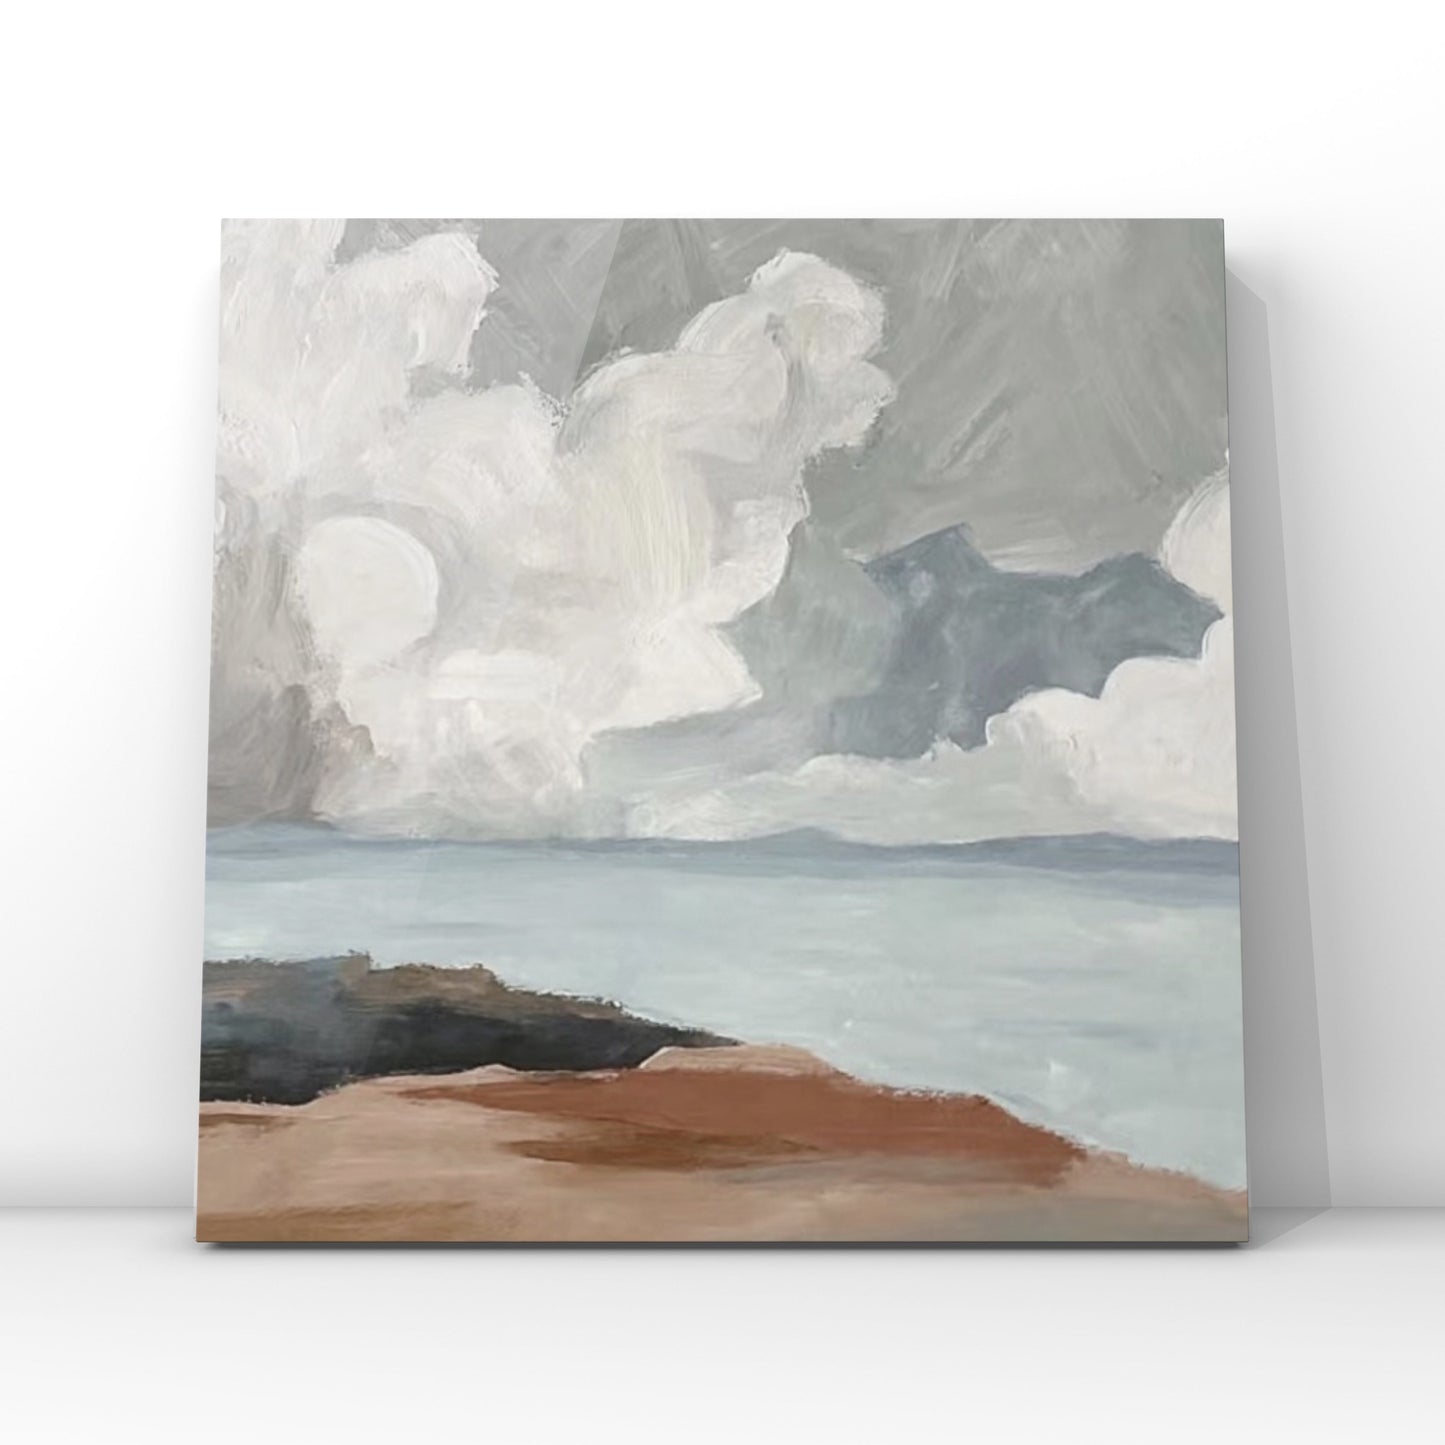 COASTAL, DARK CLOUDS AND SEA, HAND-PAINTED CANVAS